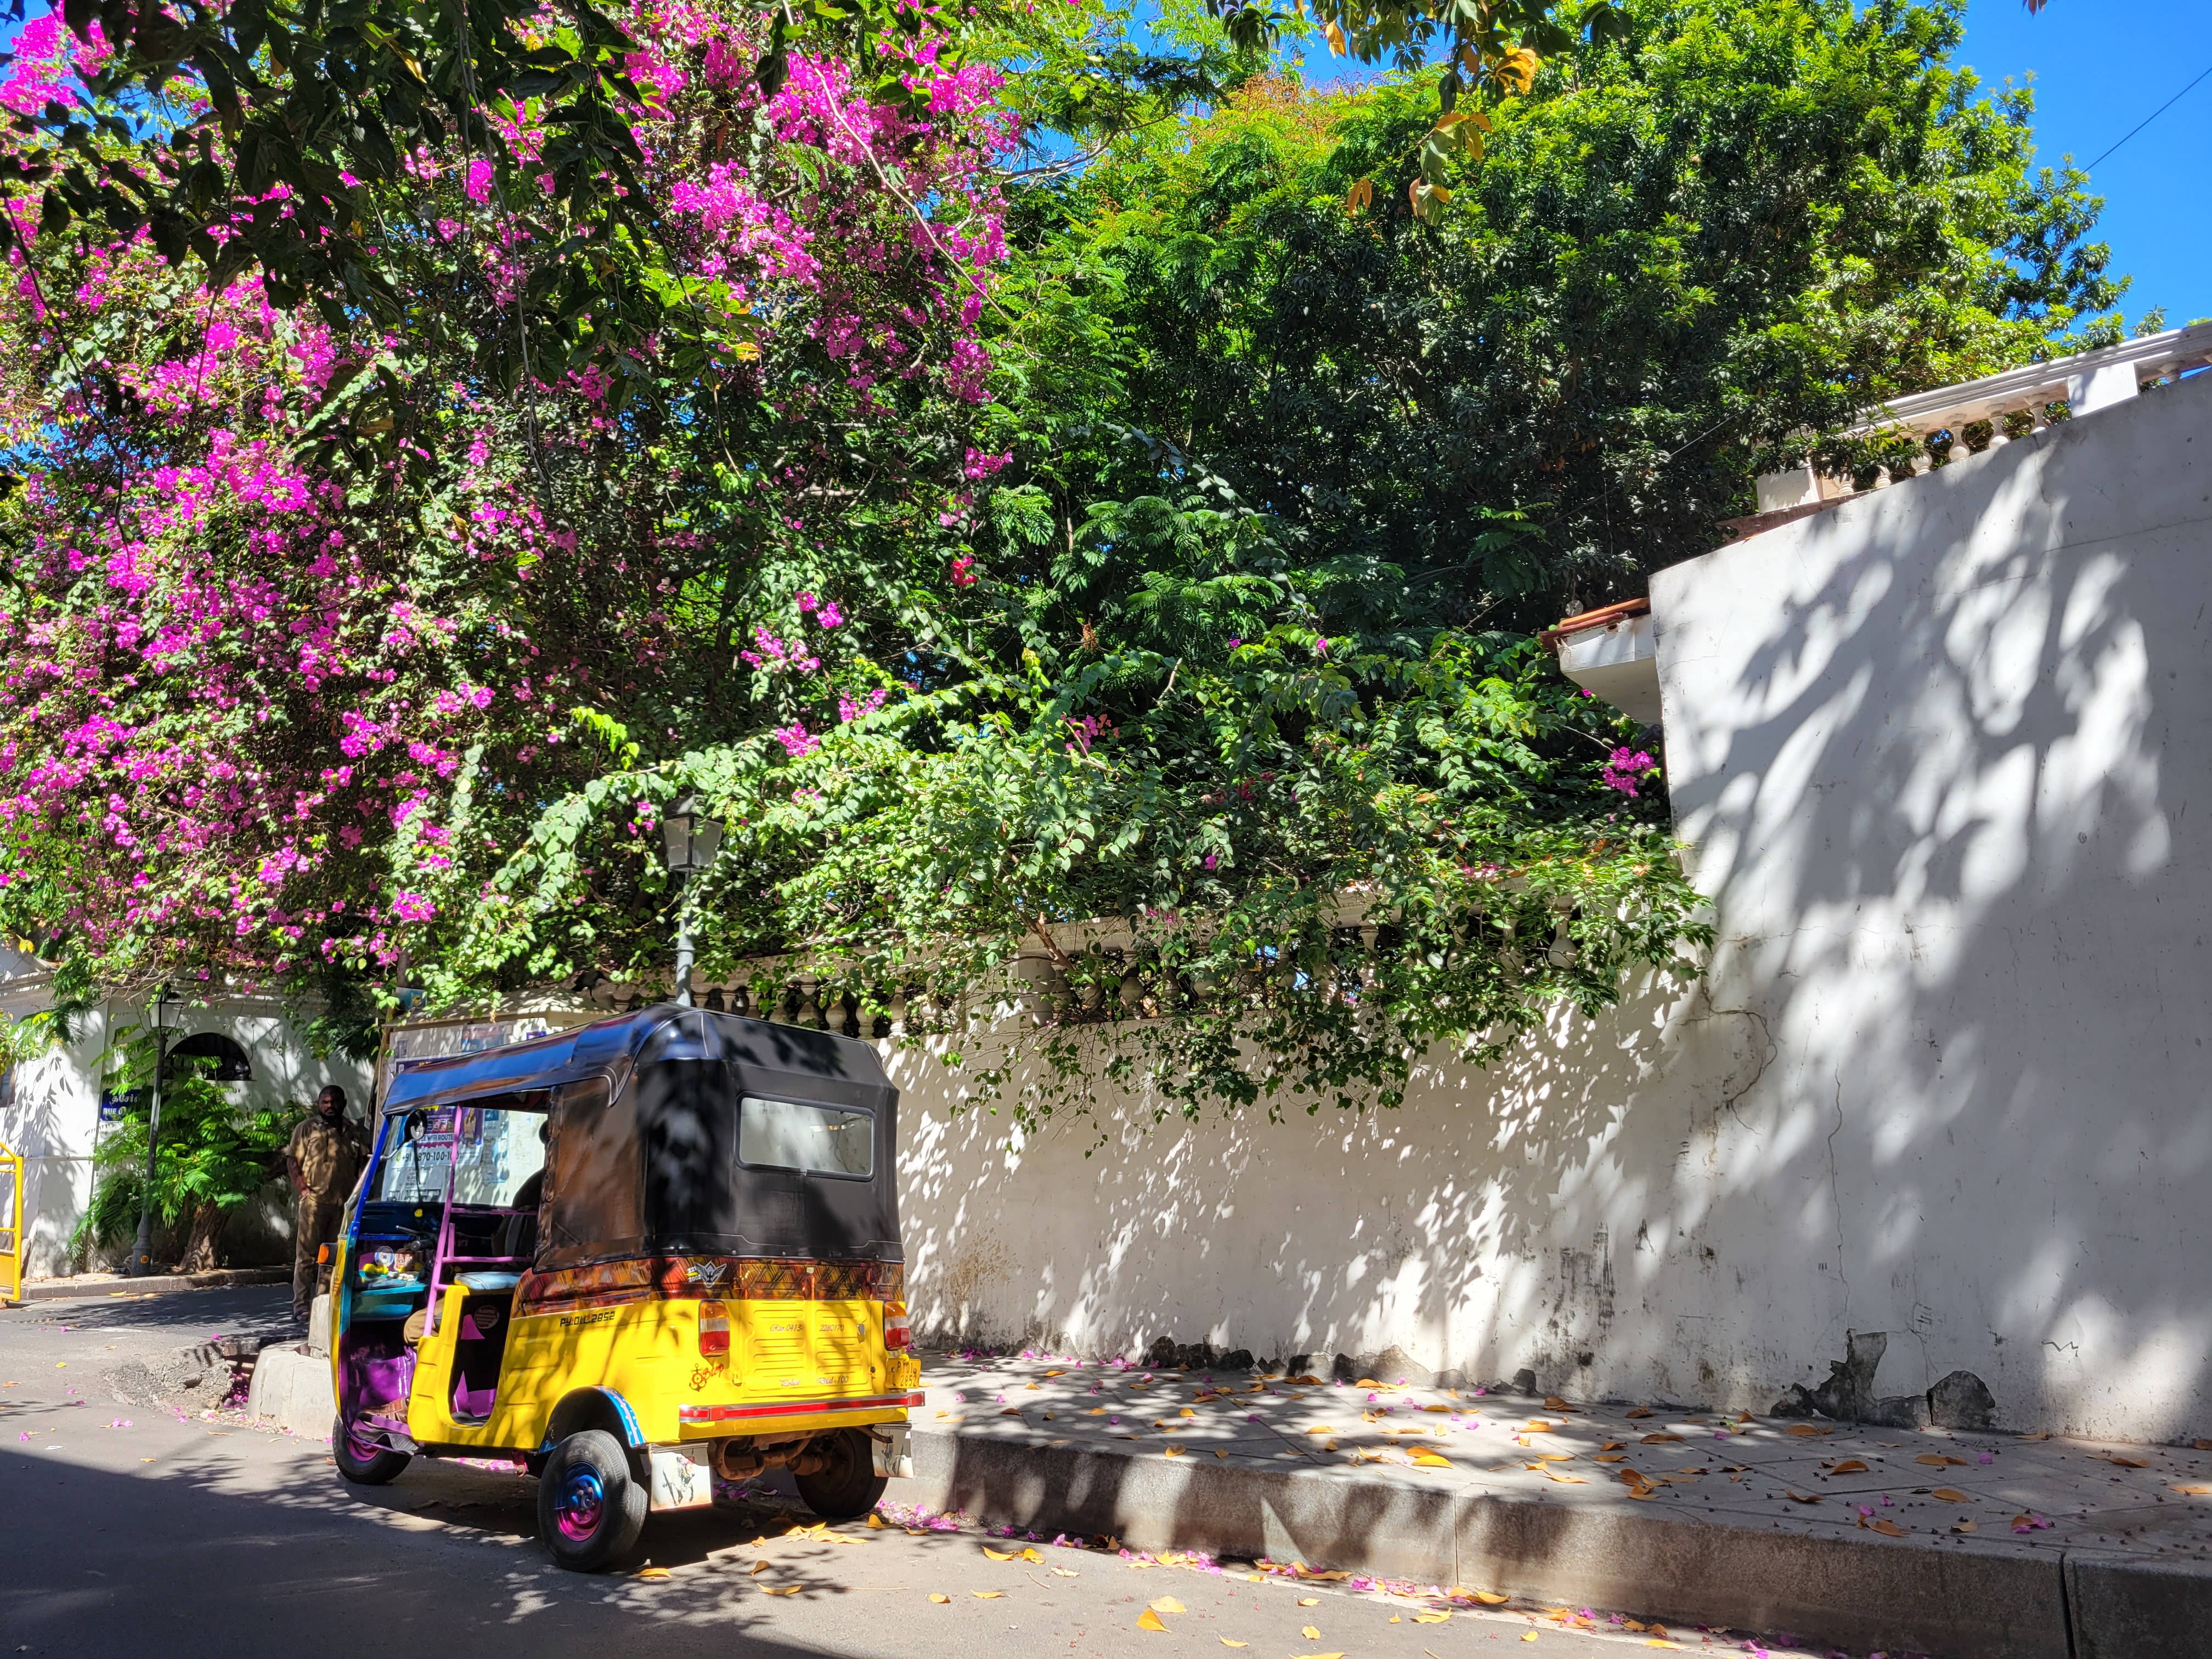 A rickshaw on the street under a tree blooming with purple flowers.